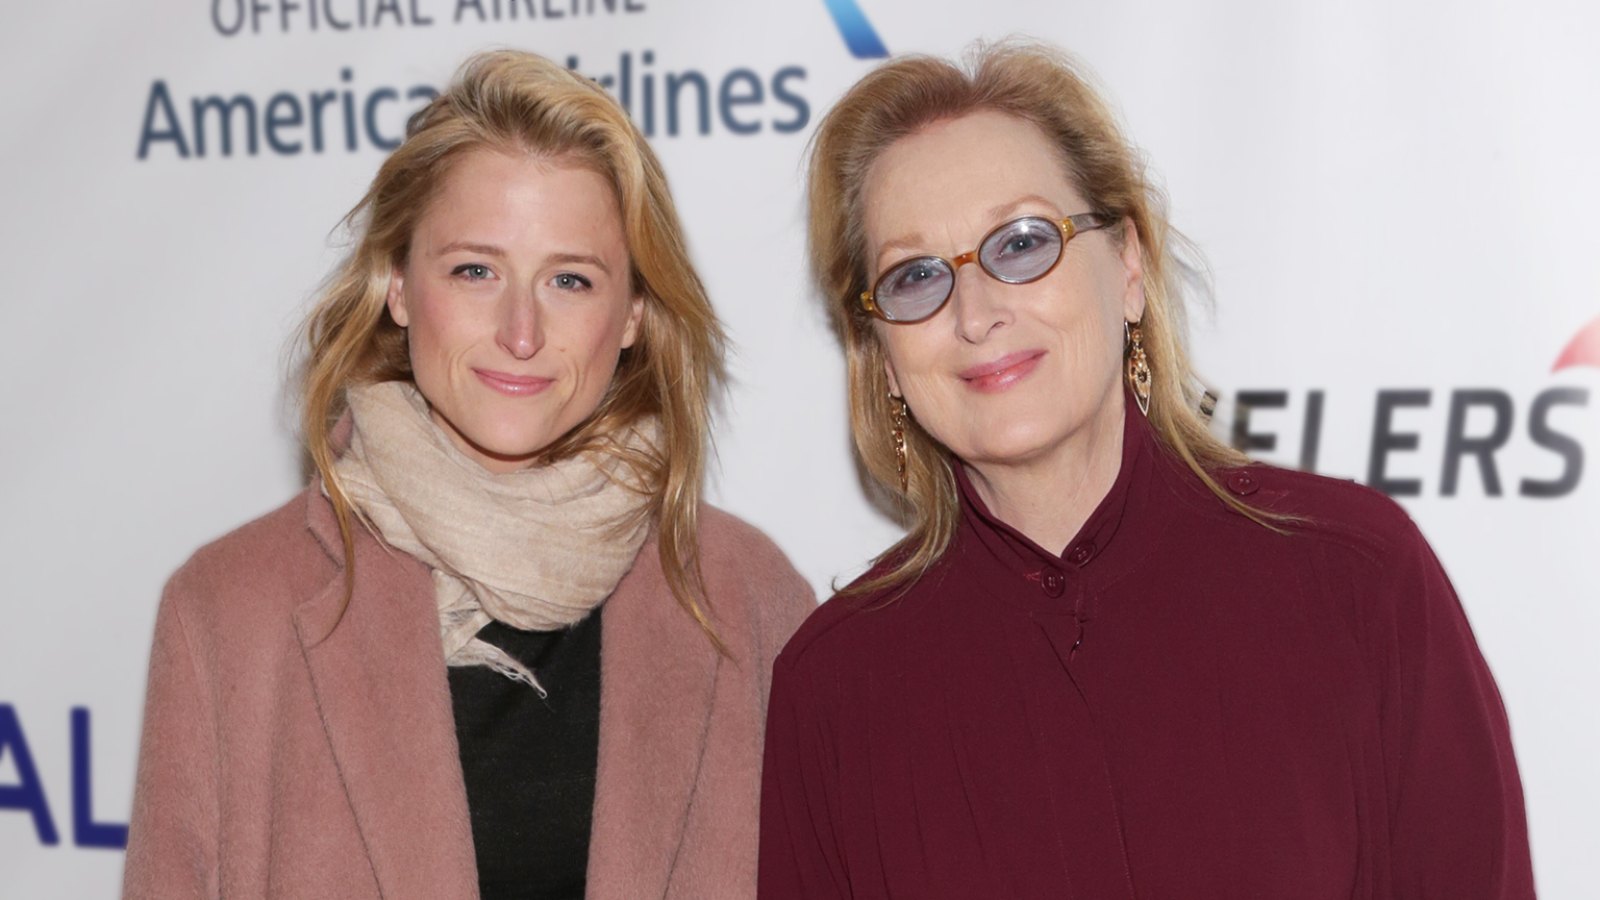 Meryl Streep’s Daughter Mamie Gummer and Fiance Mehar Sethi Welcome First Child